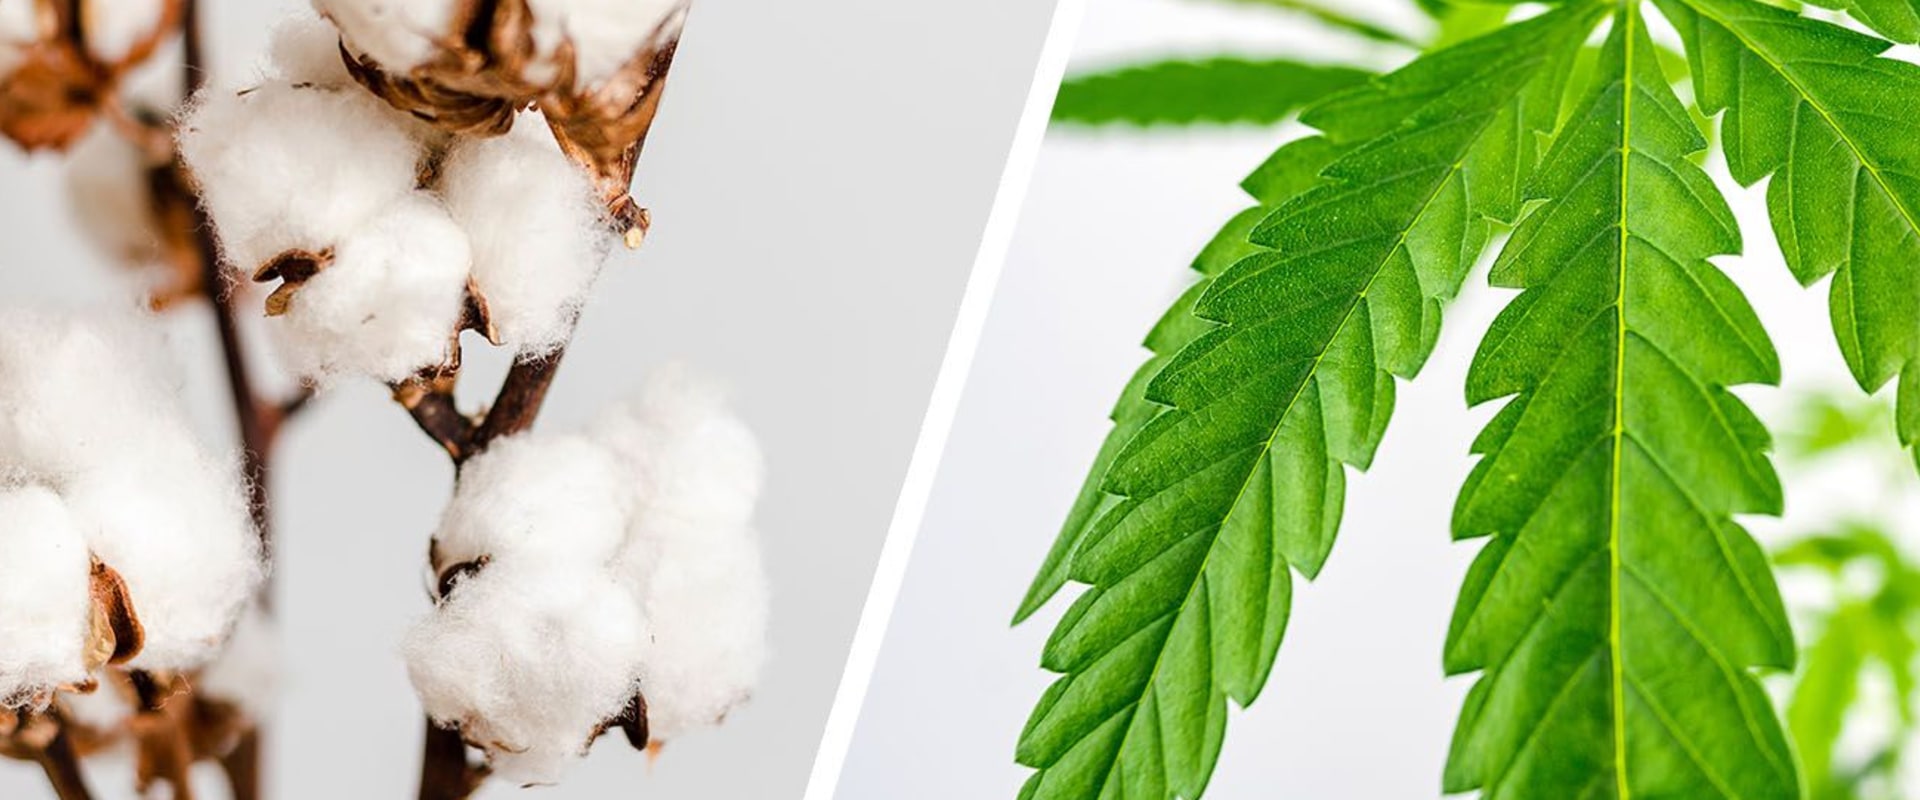 The Benefits of Hemp Clothing: Why is it Better than Cotton?